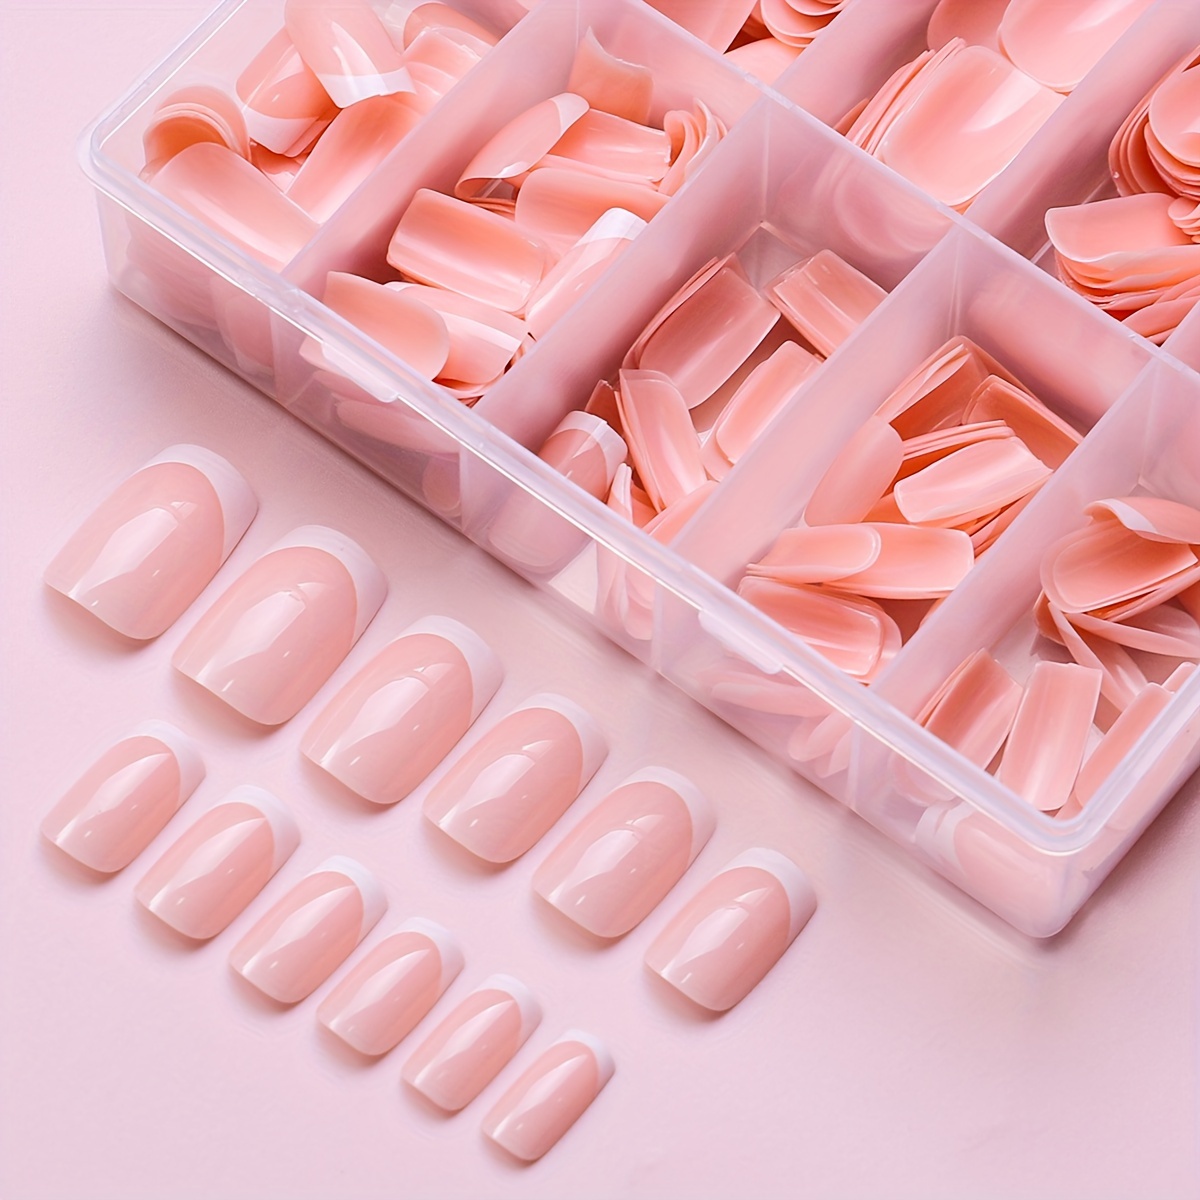 

240-piece French Tip Press-on Nails Set - Medium Square, Glossy Acrylic False Nails In White & Nude For Women's Manicure